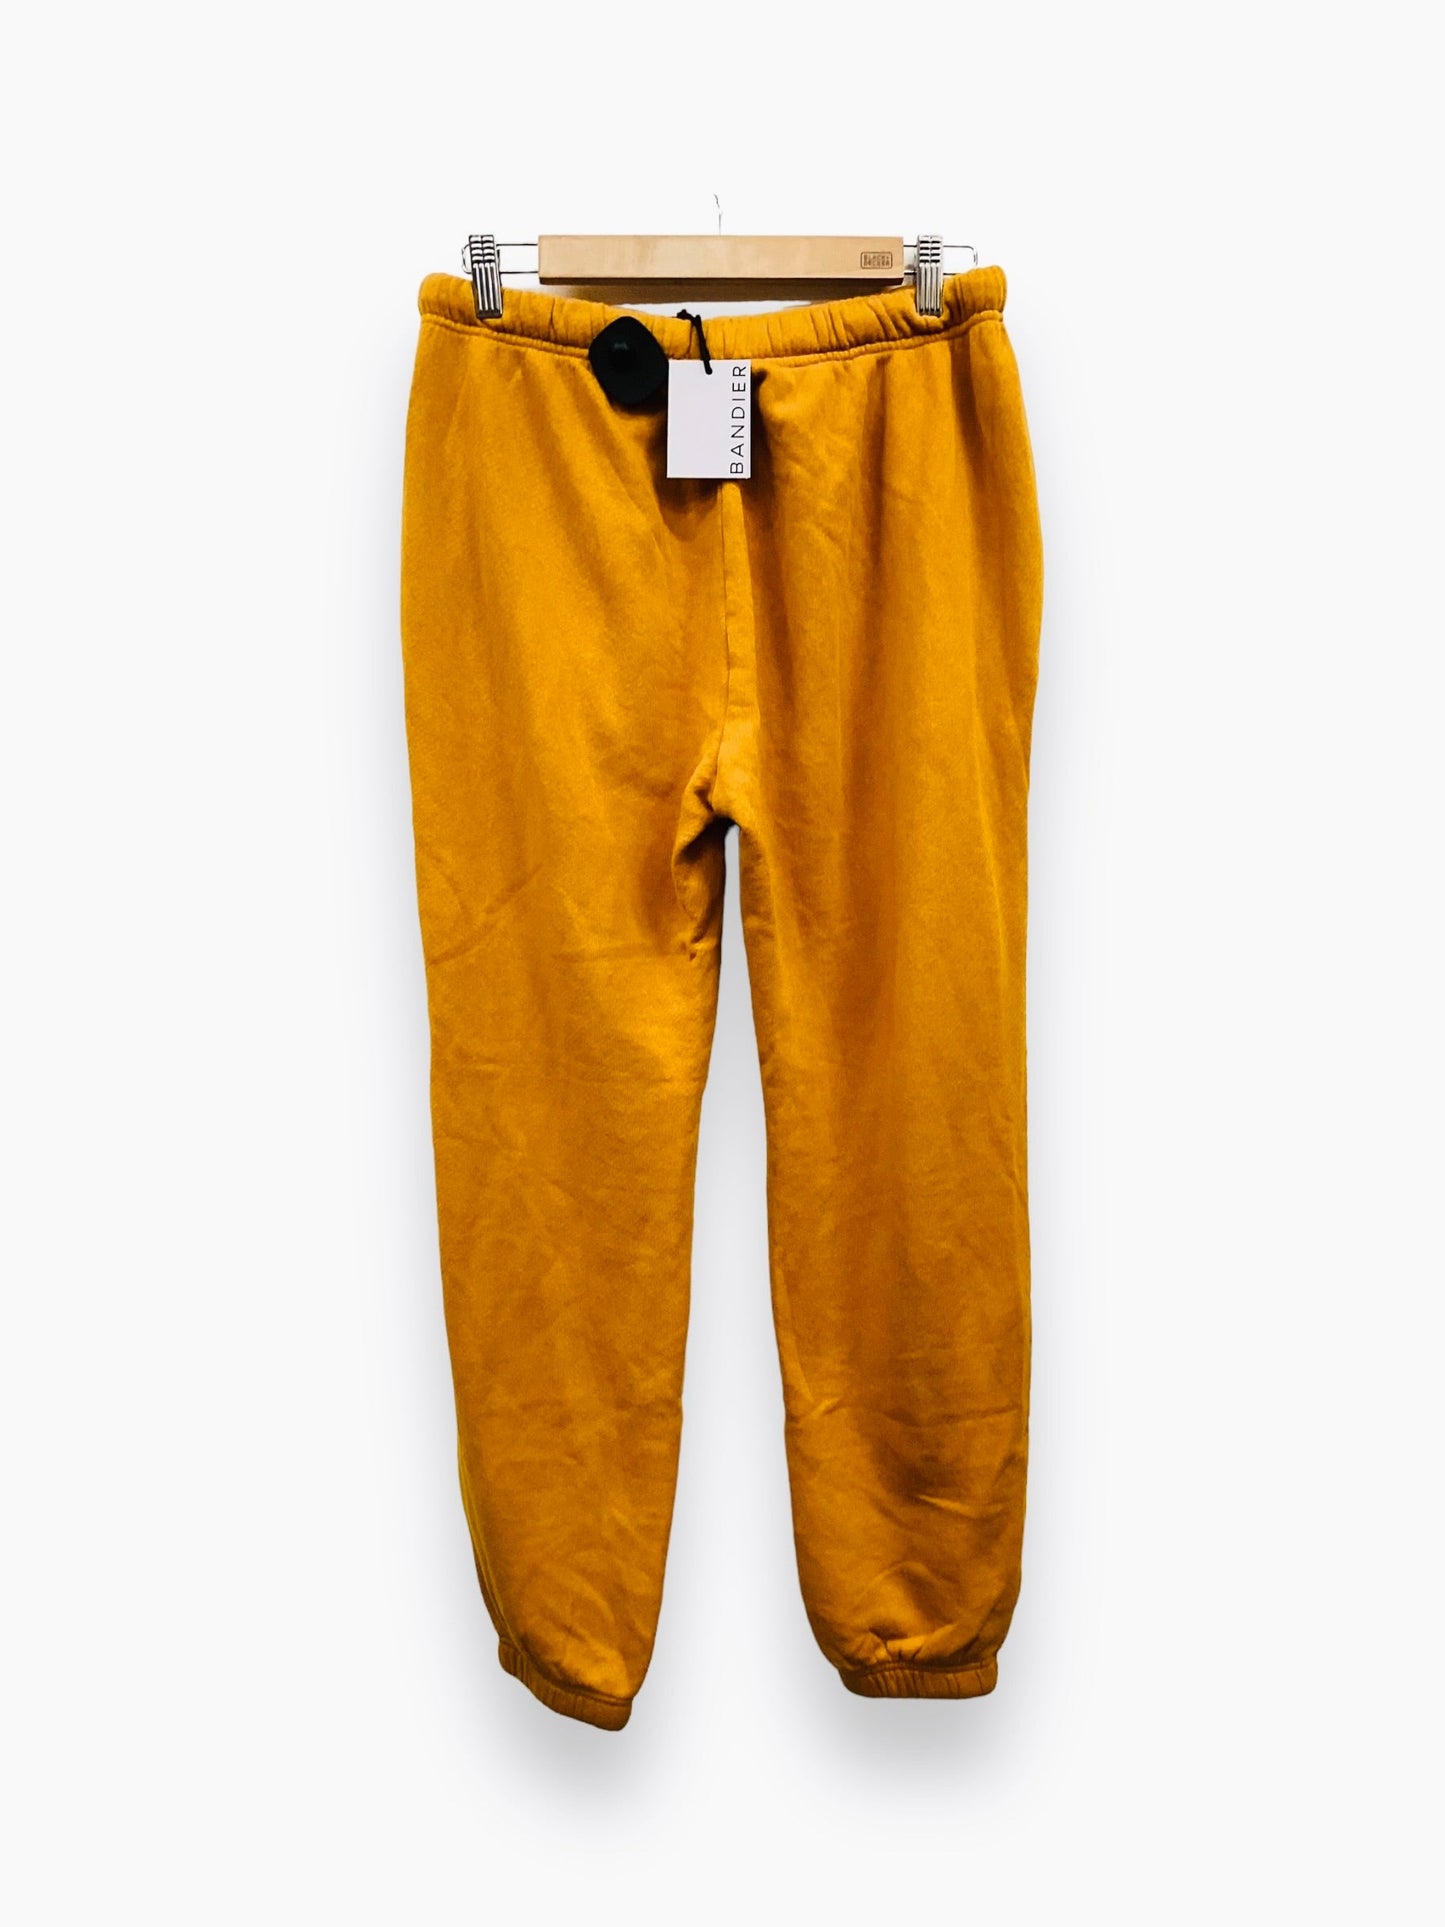 NWT Yellow Pants Joggers Clothes Mentor, Size M